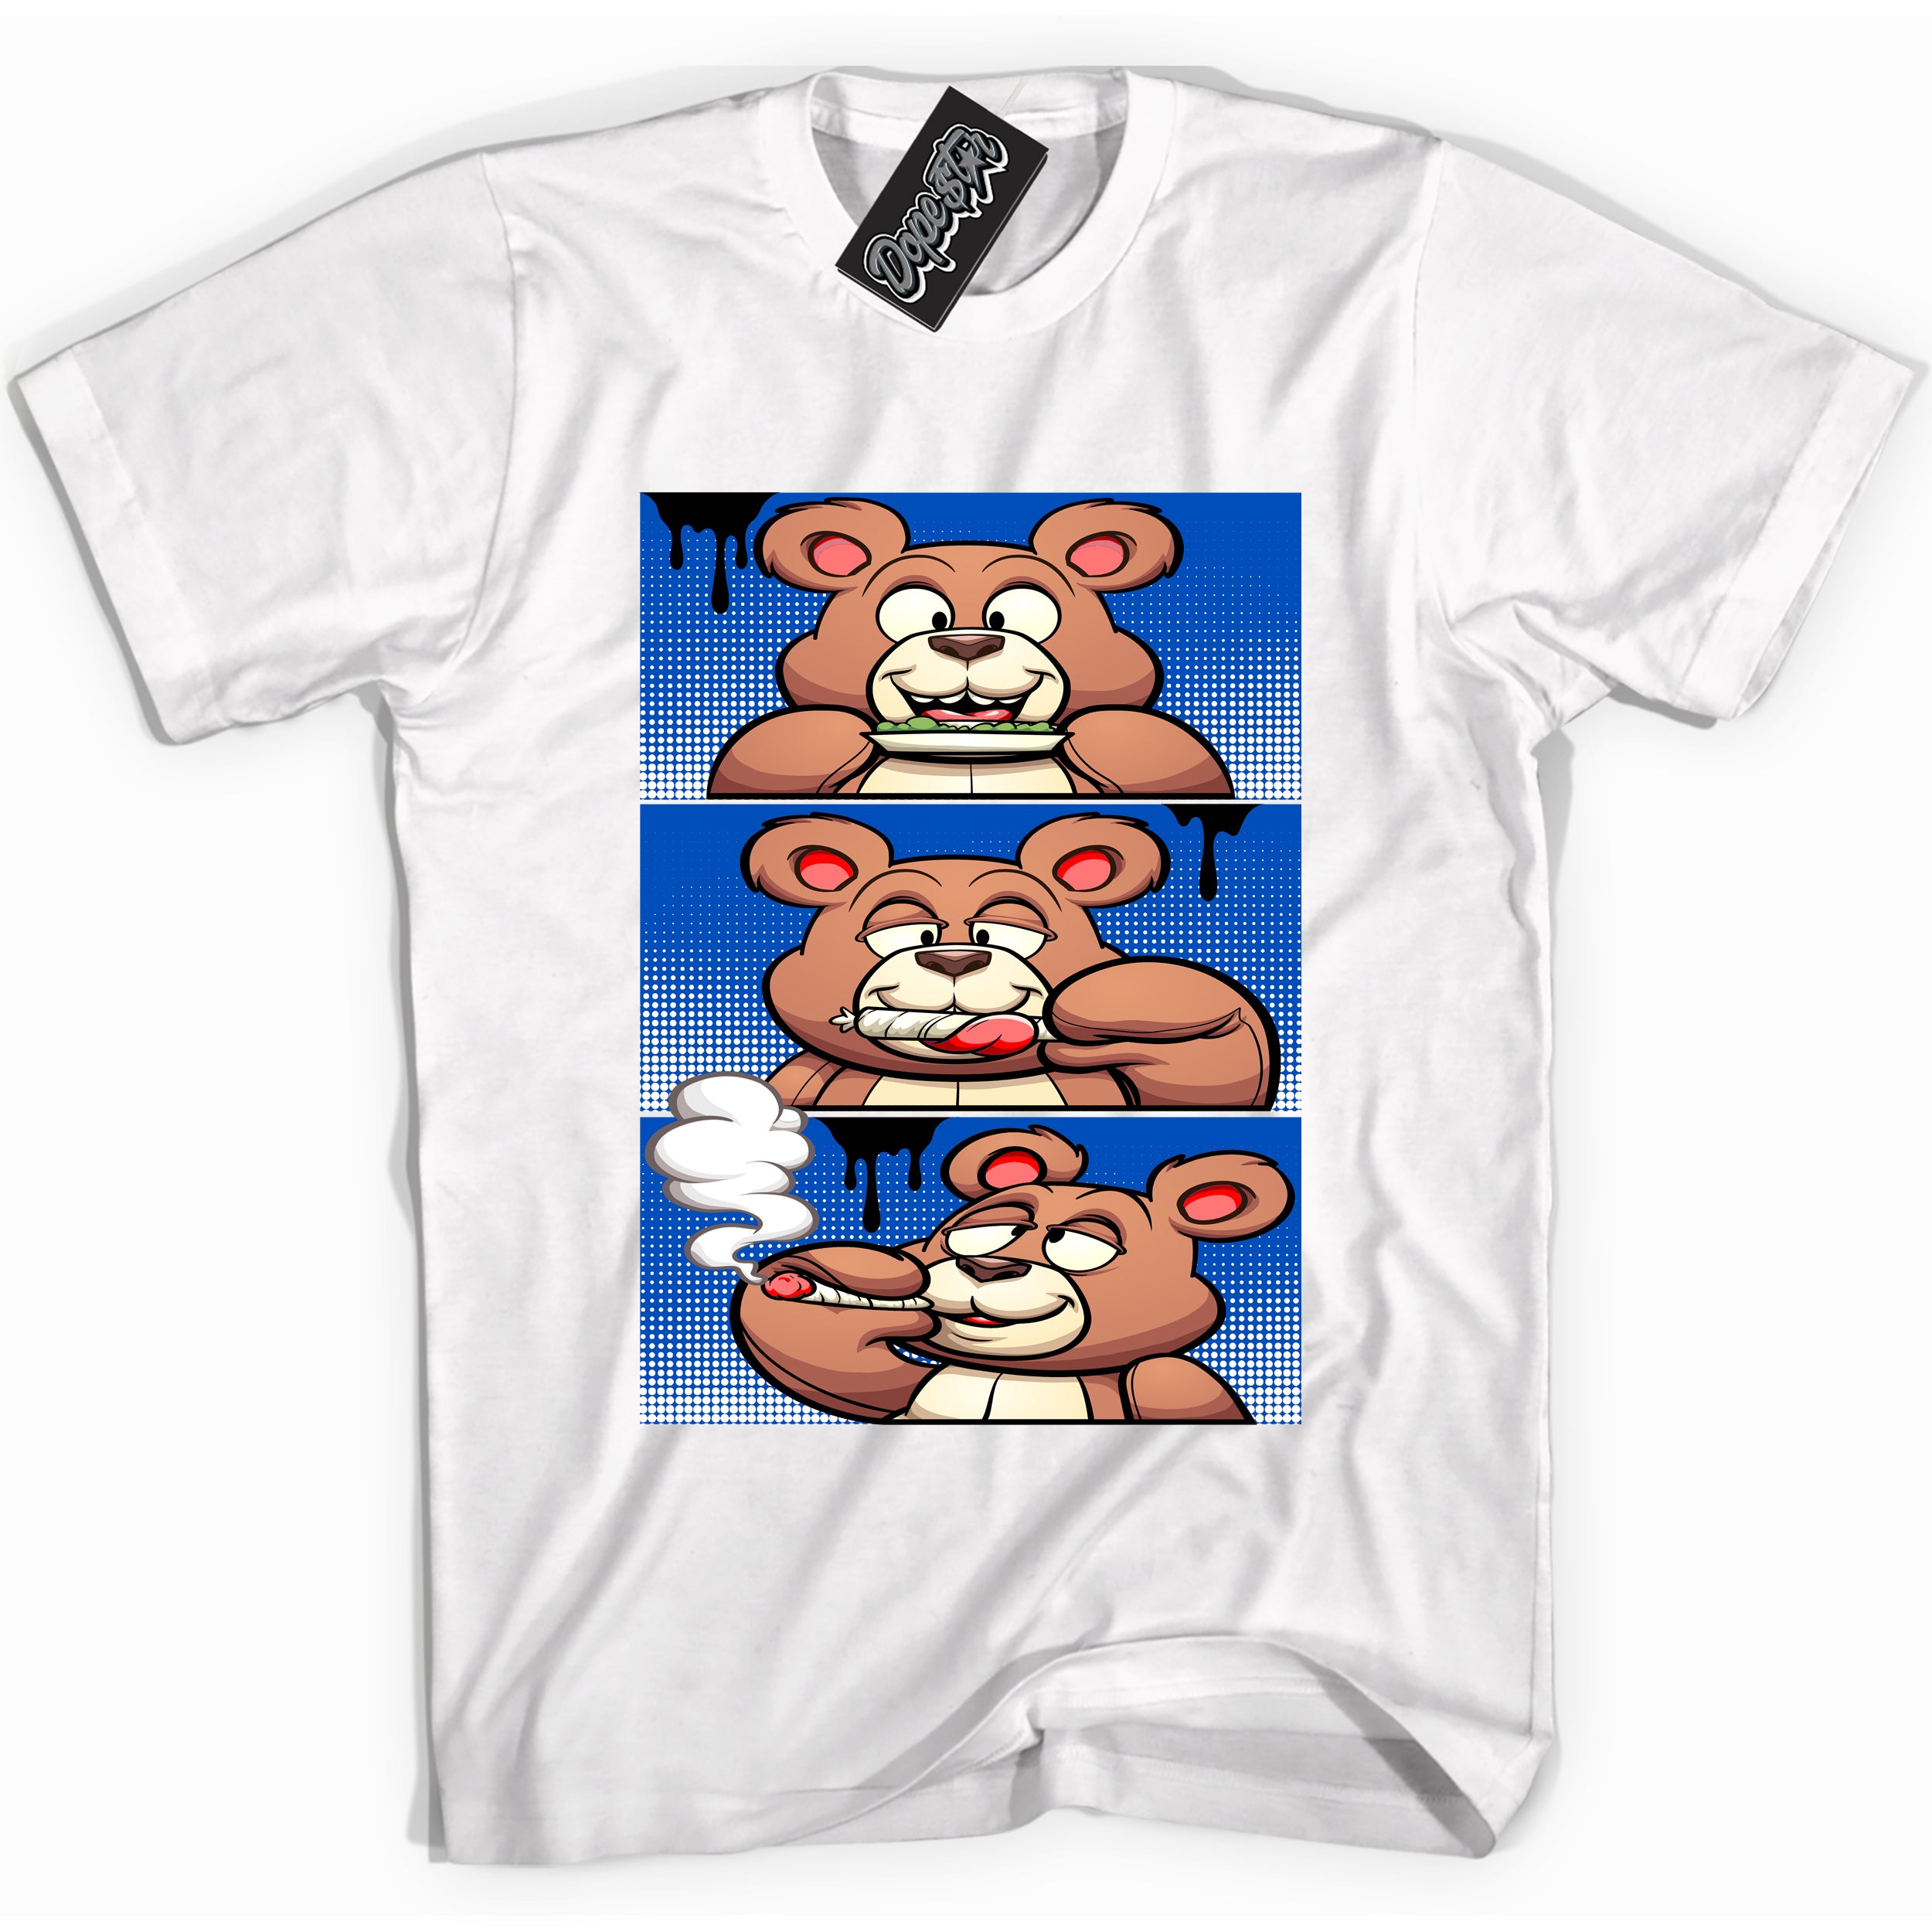 Cool White graphic tee with Roll It Lick It Smoke It Bear print, that perfectly matches OG Royal Reimagined 1s sneakers 